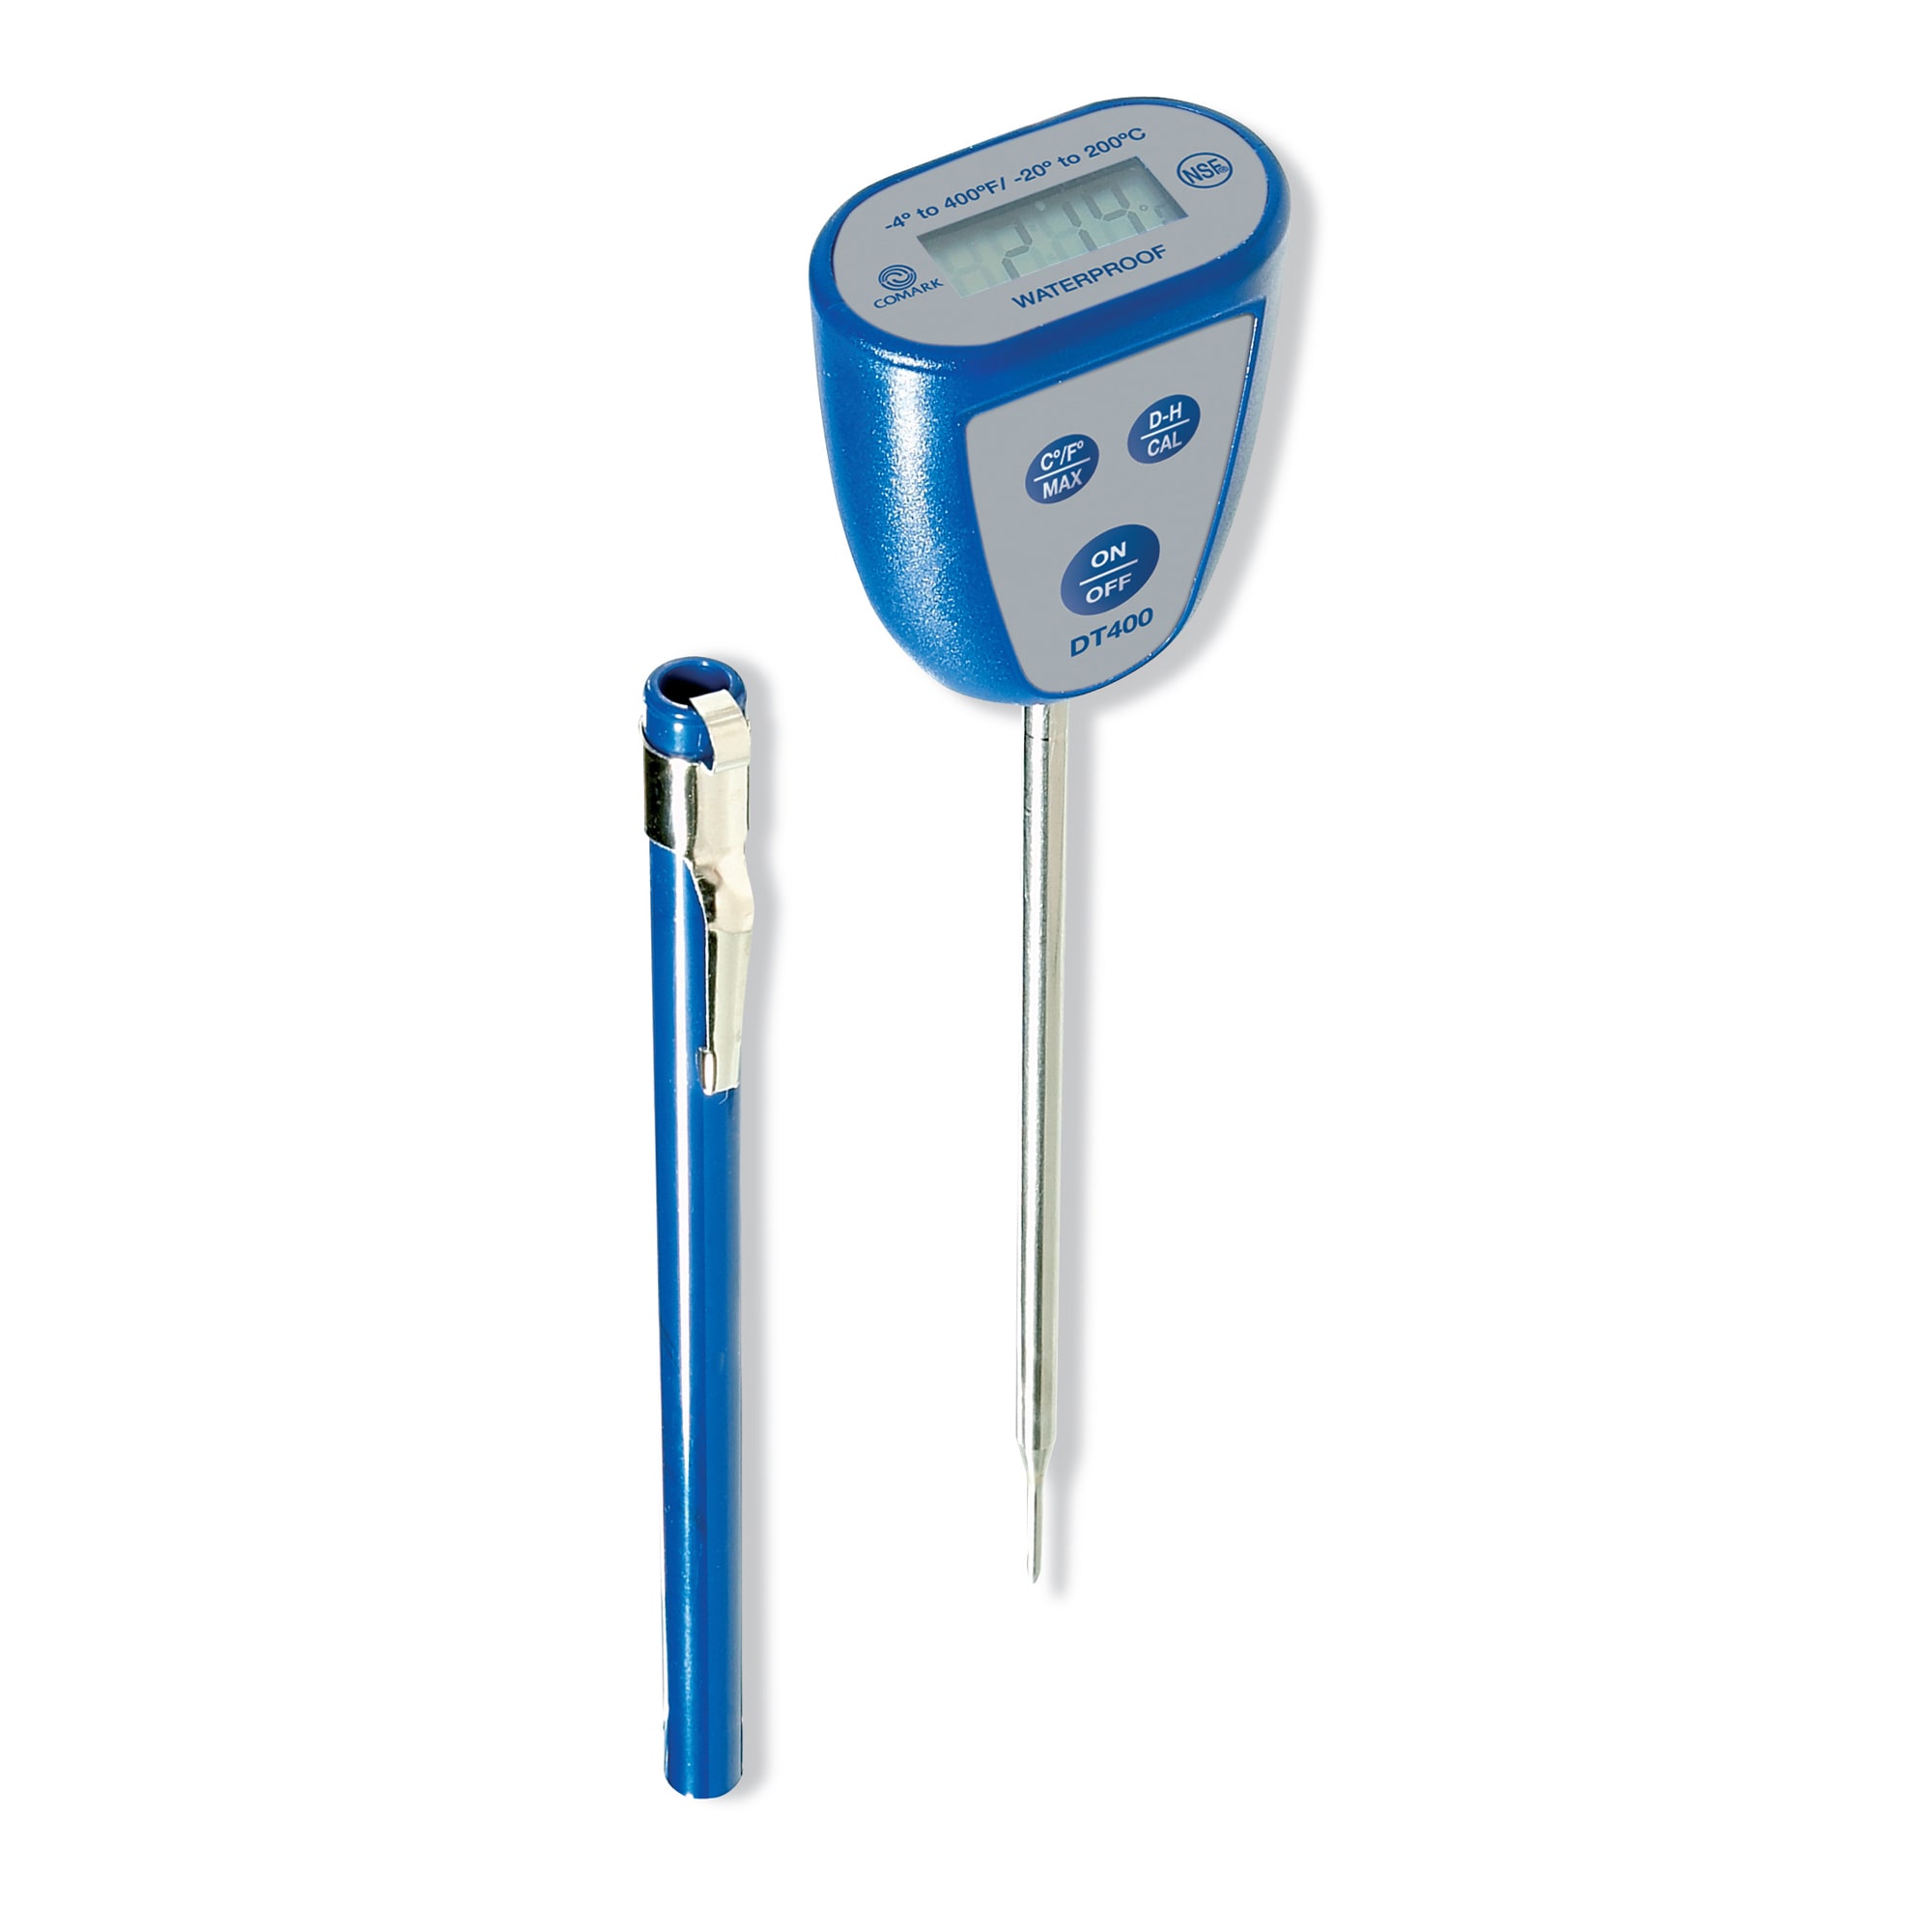 DT400 Pocket Thermometer with Thin Tip